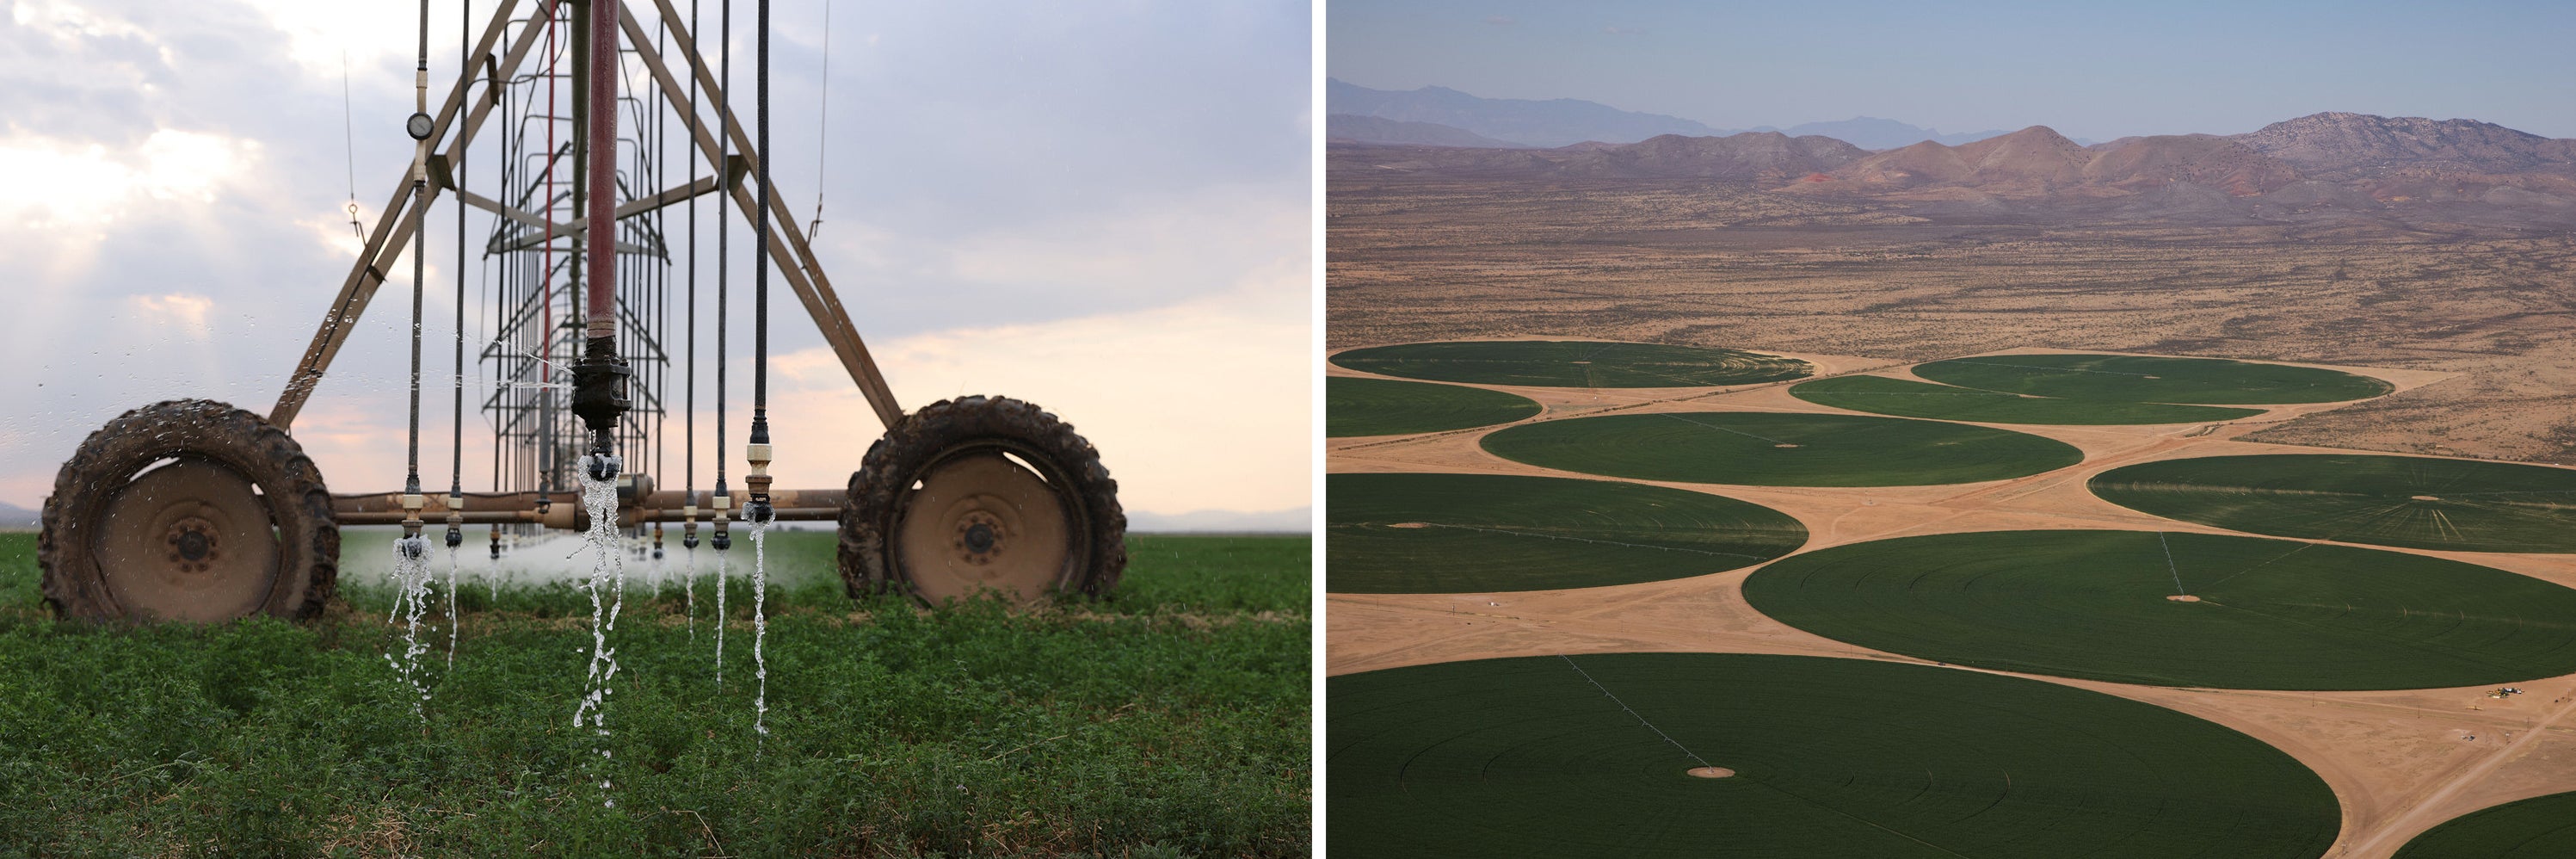 Side-by-side images show an irrigation machine standing in a lush field of vegetation, and an overhead view of crops